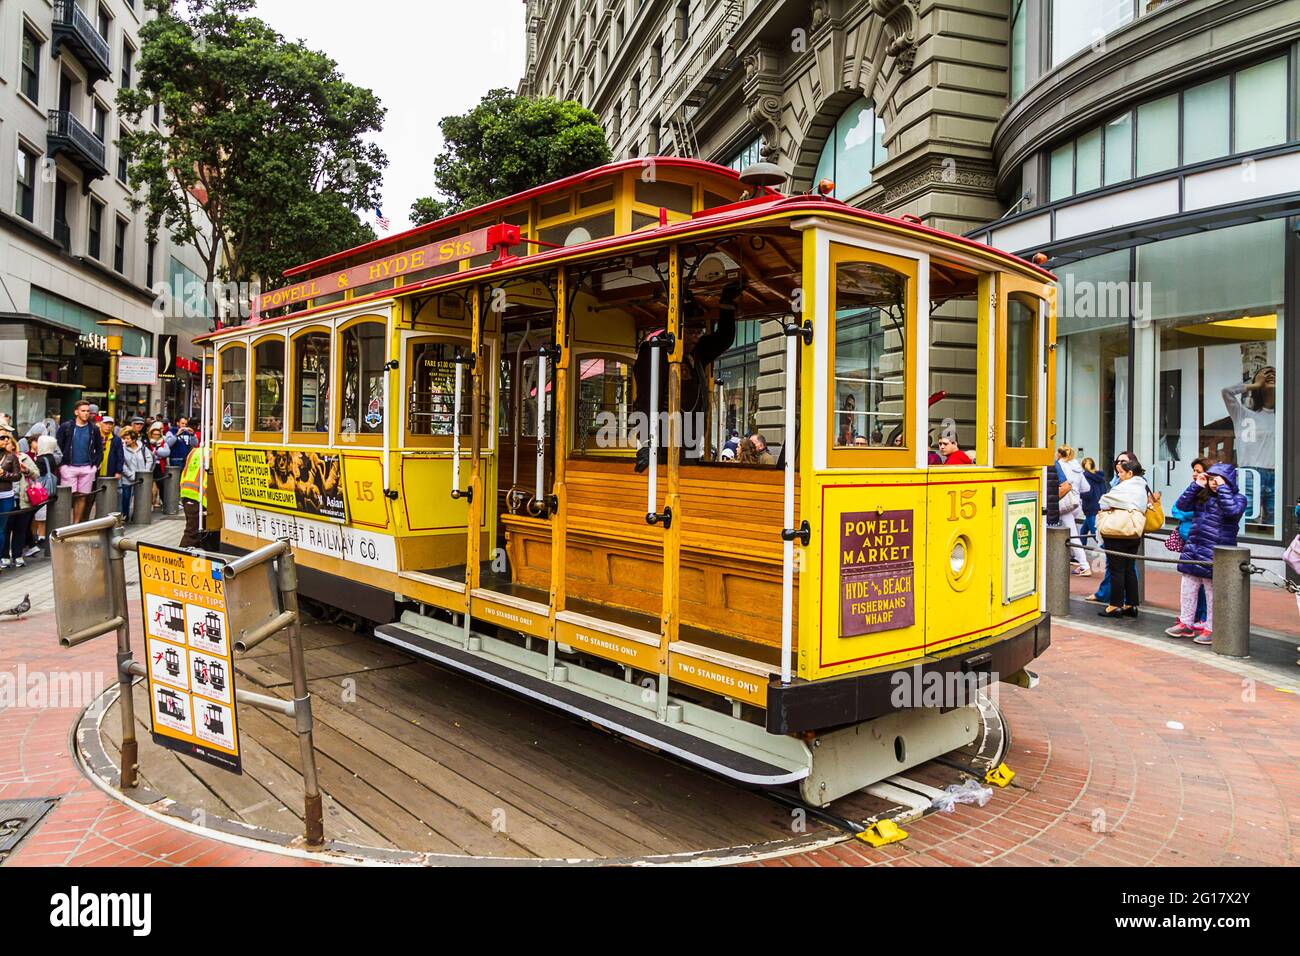 A cable car on turntable and tourists waiting for a ride in San Francisco Stock Photo